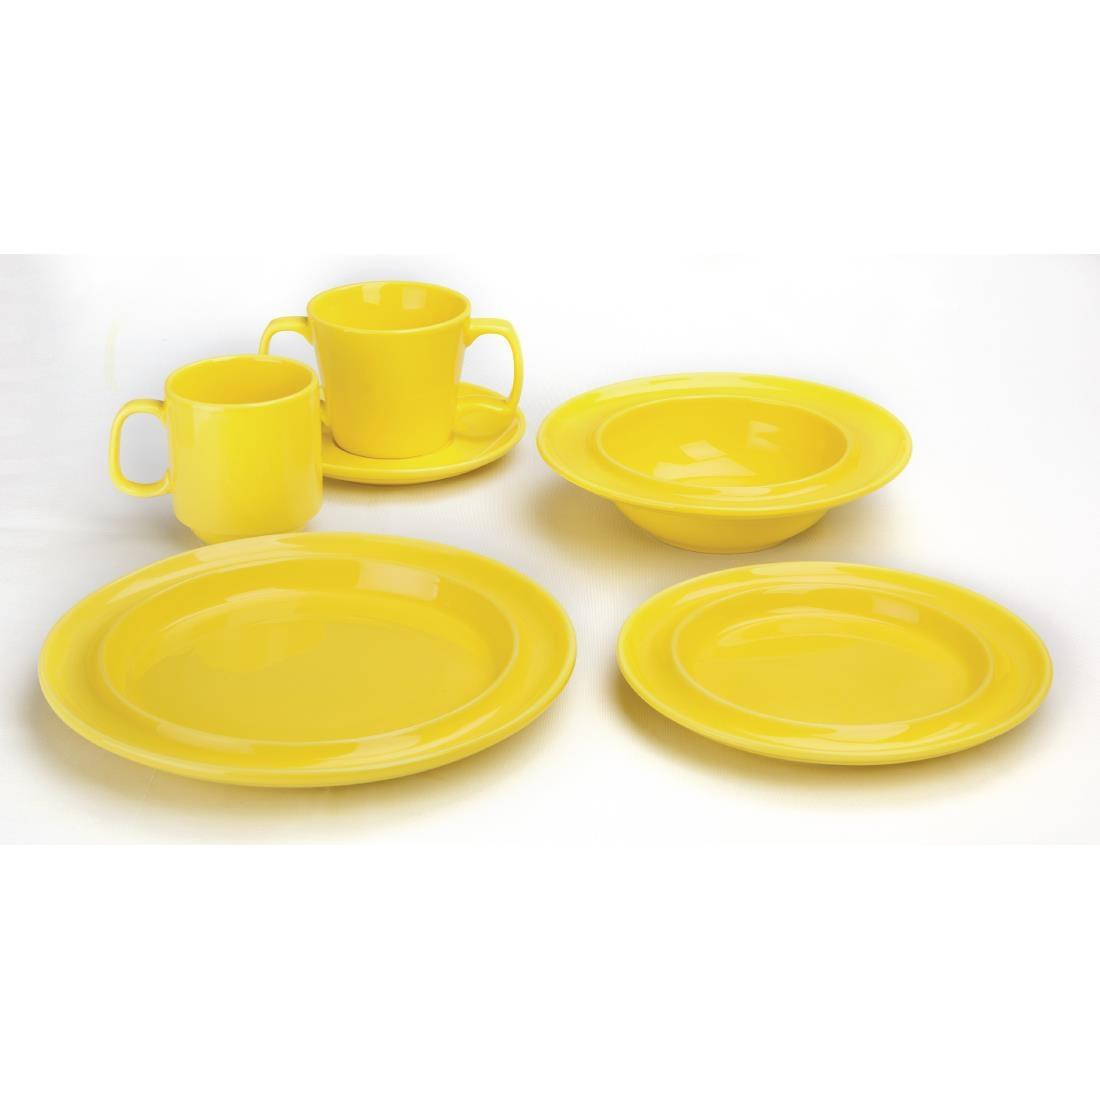 Olympia Heritage Stacking Mugs Yellow 300ml (Pack of 6) - DW150  - 3